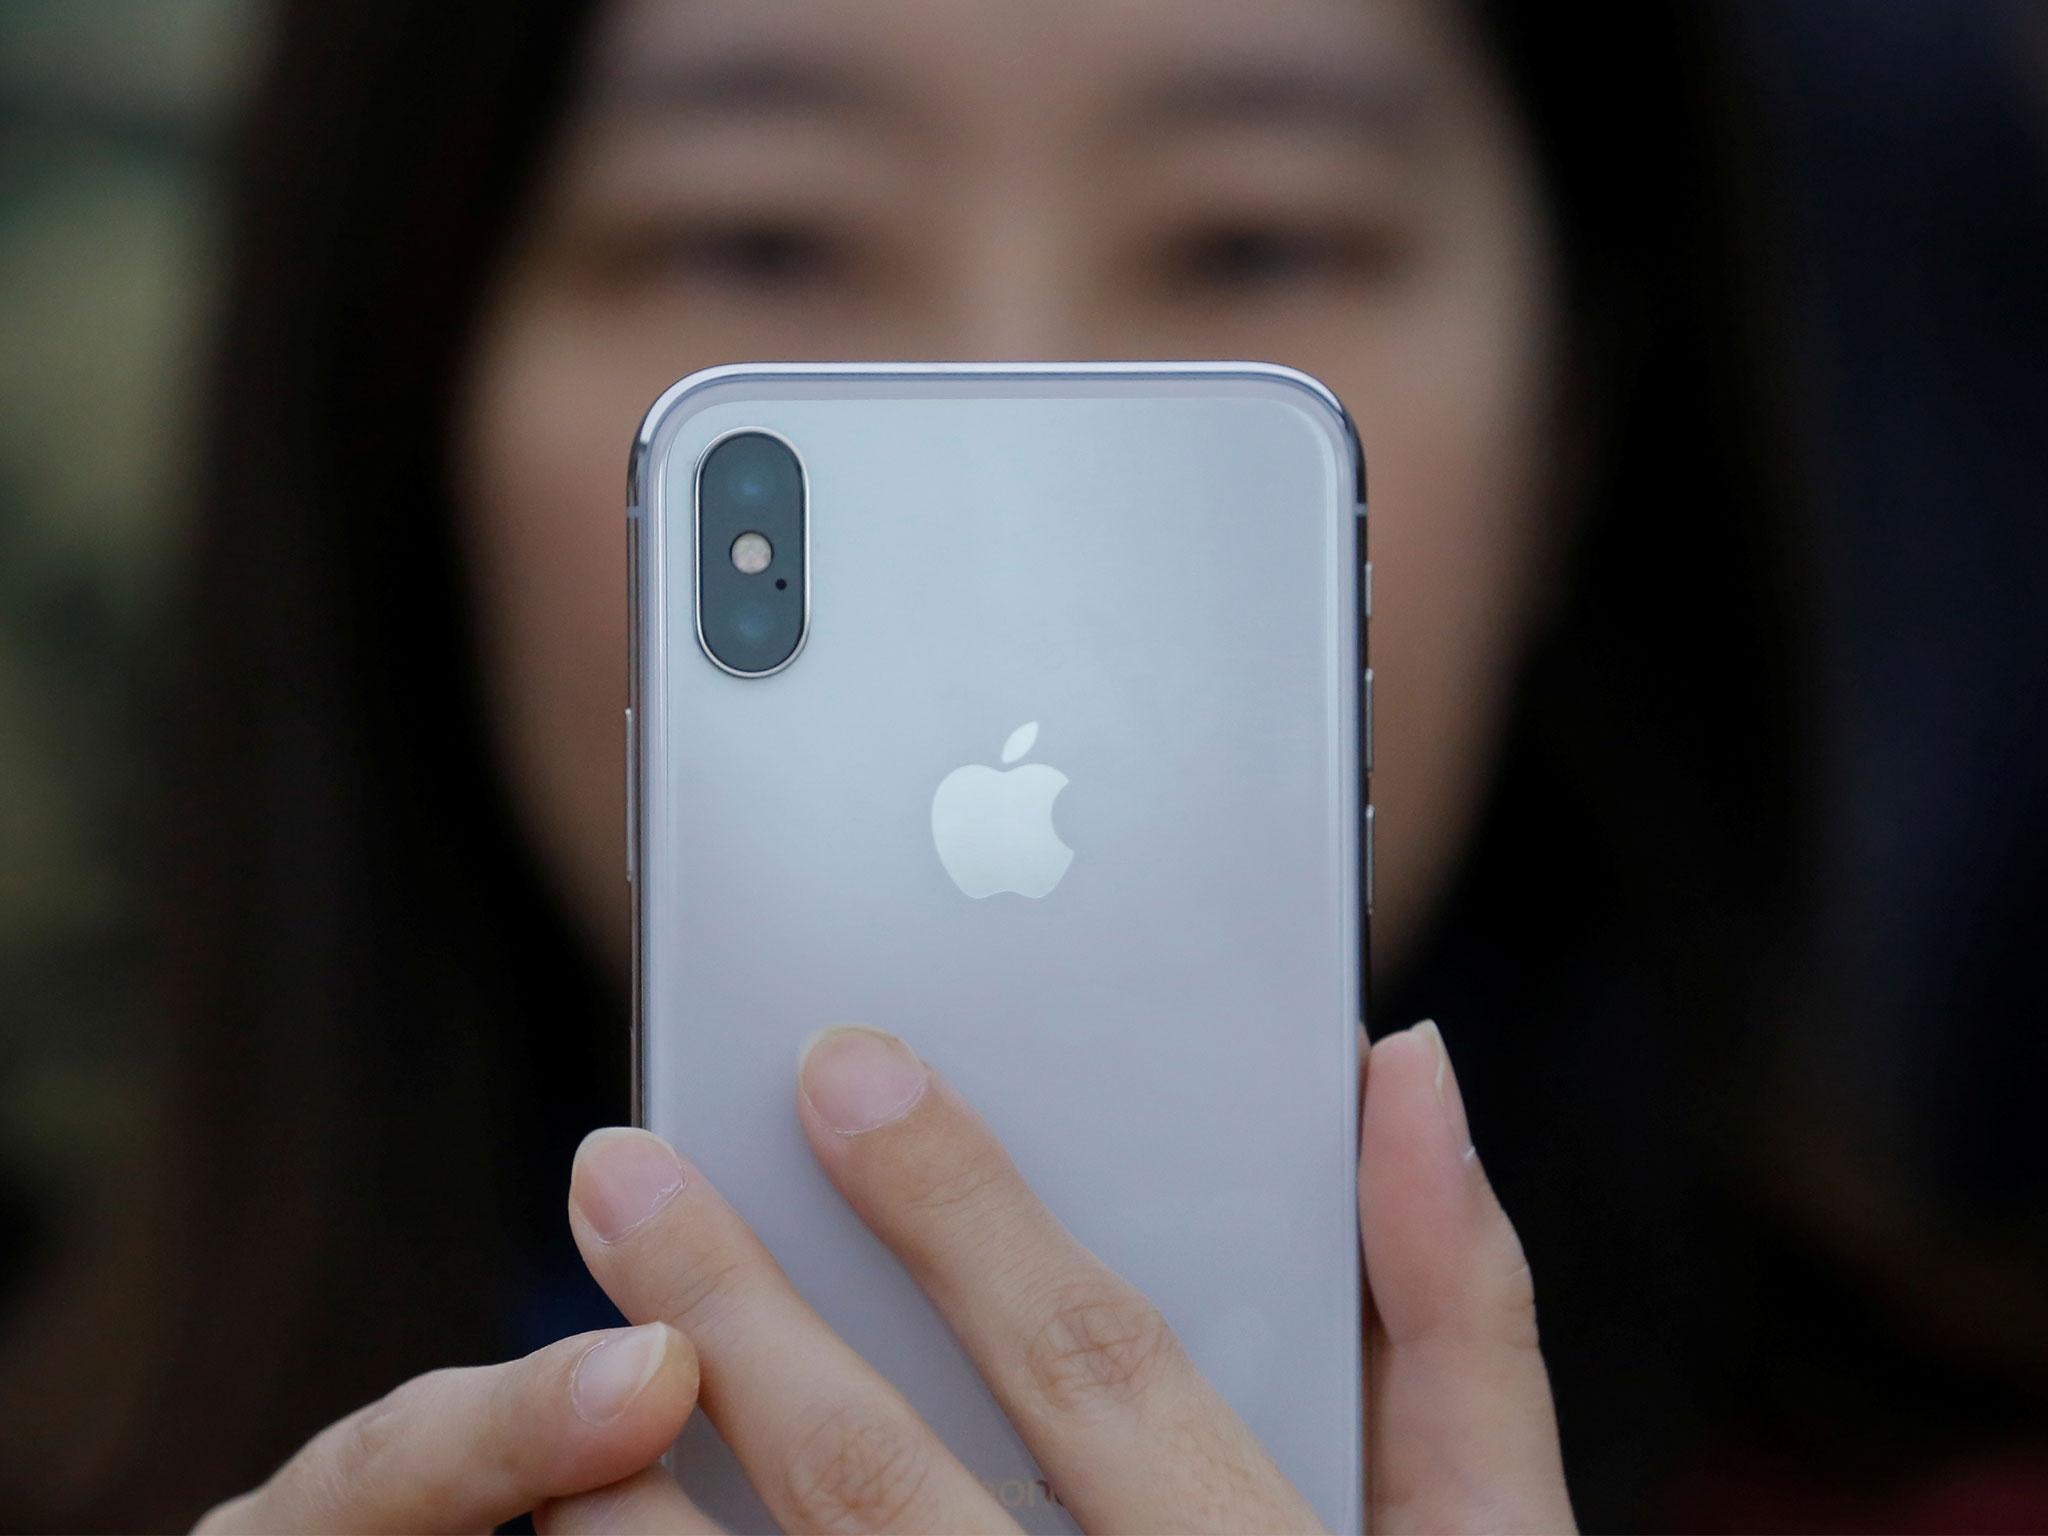 Apple denied 176 requests for information on its users from Chinese authorities between 2013 and 2017